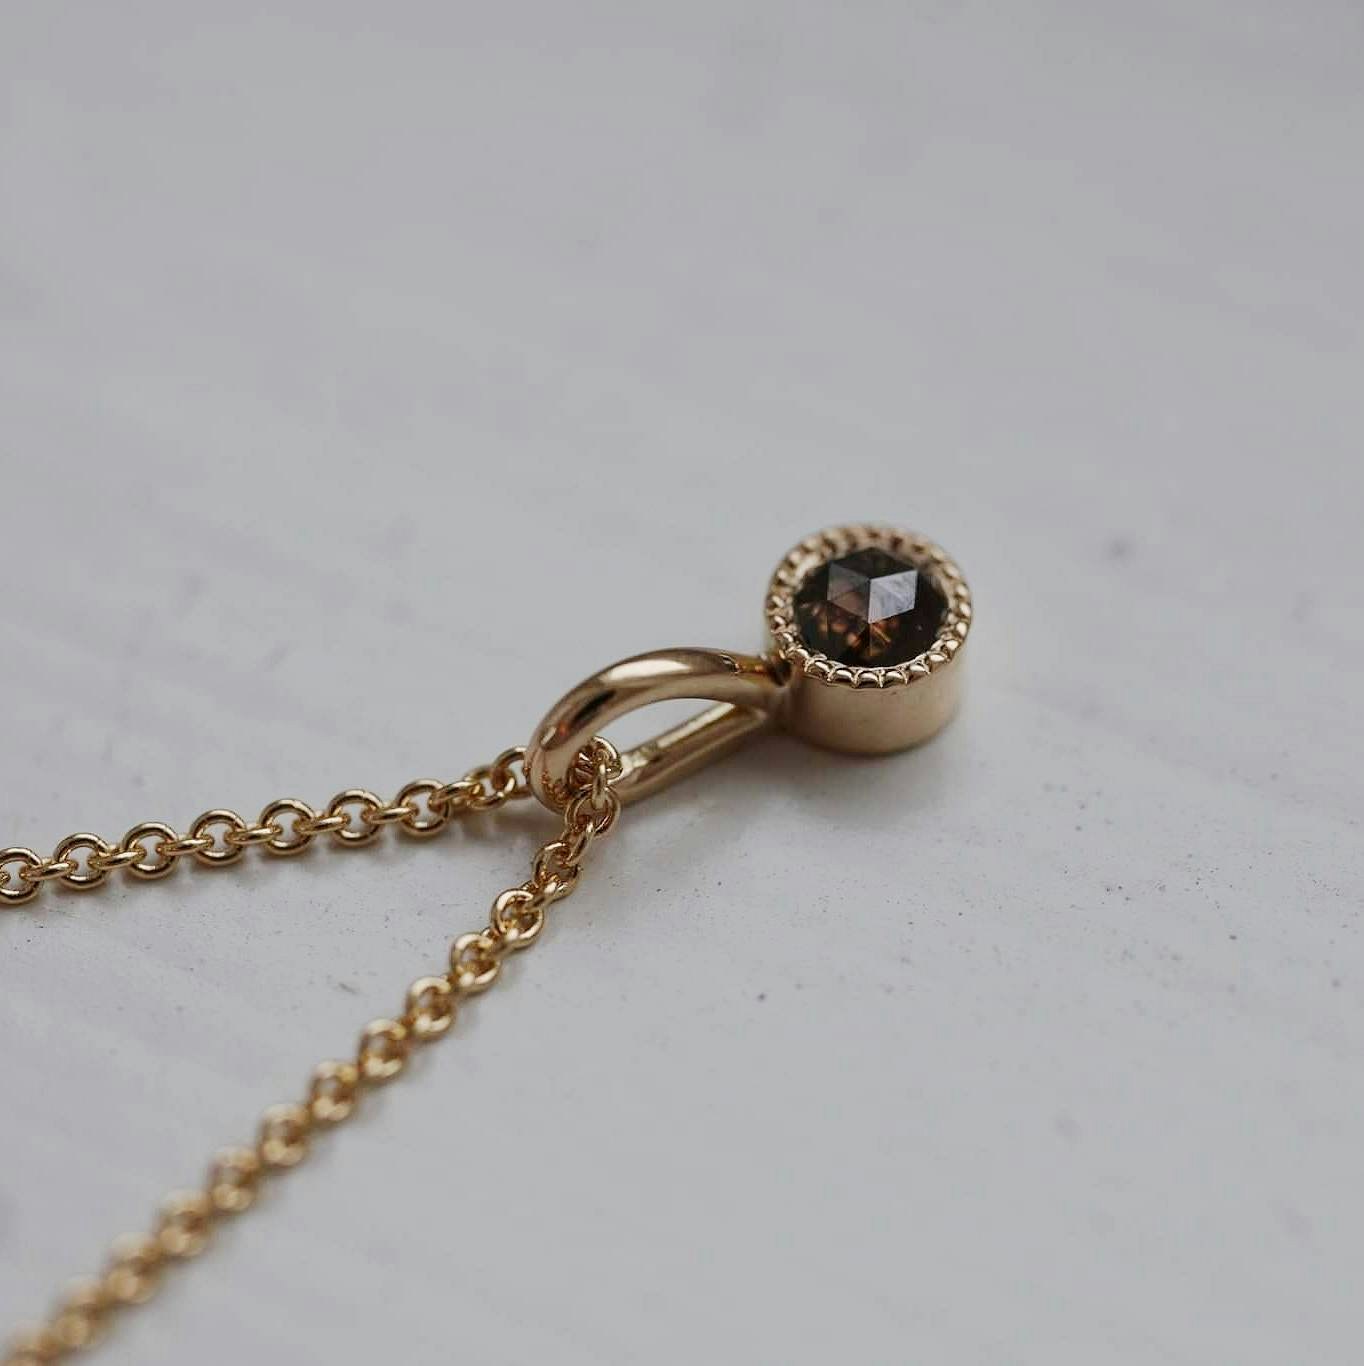 "Twinkle" pendant in gold with a rosecut brown diamond